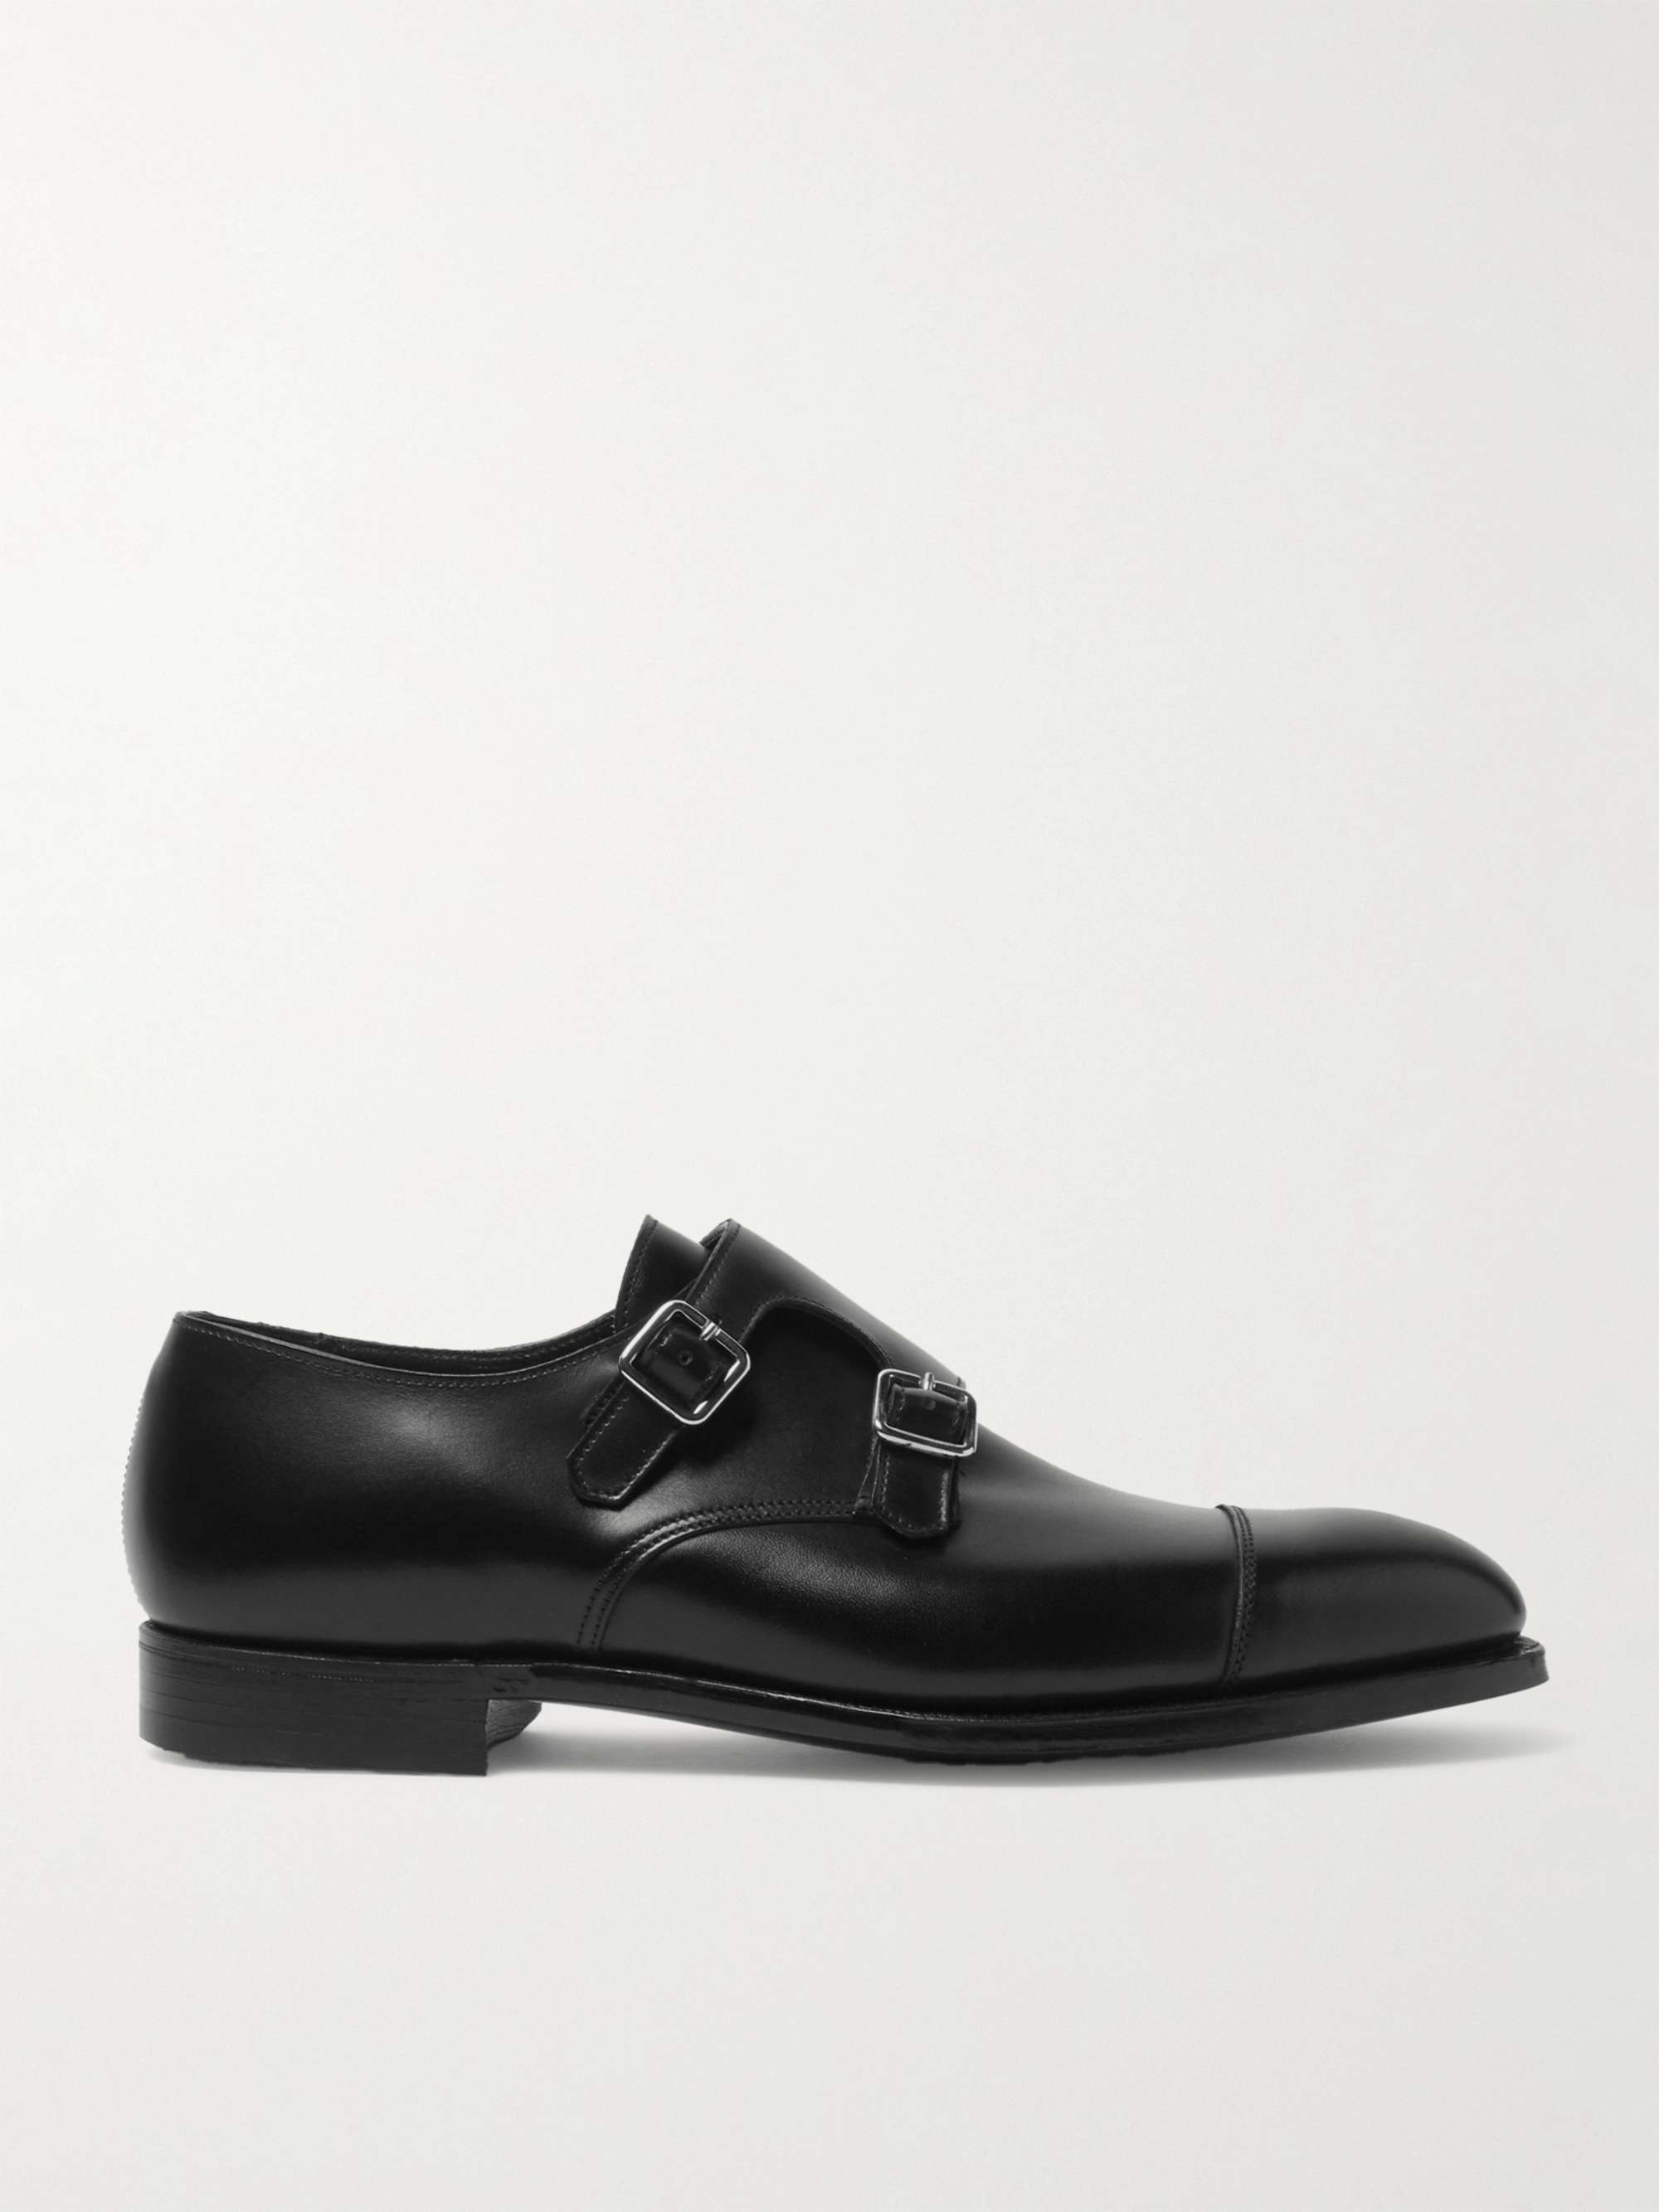 Mens Shoes Slip-on shoes Monk shoes George Cleverley Thomas Cap-toe Leather Monk-strap Shoes in Black for Men 